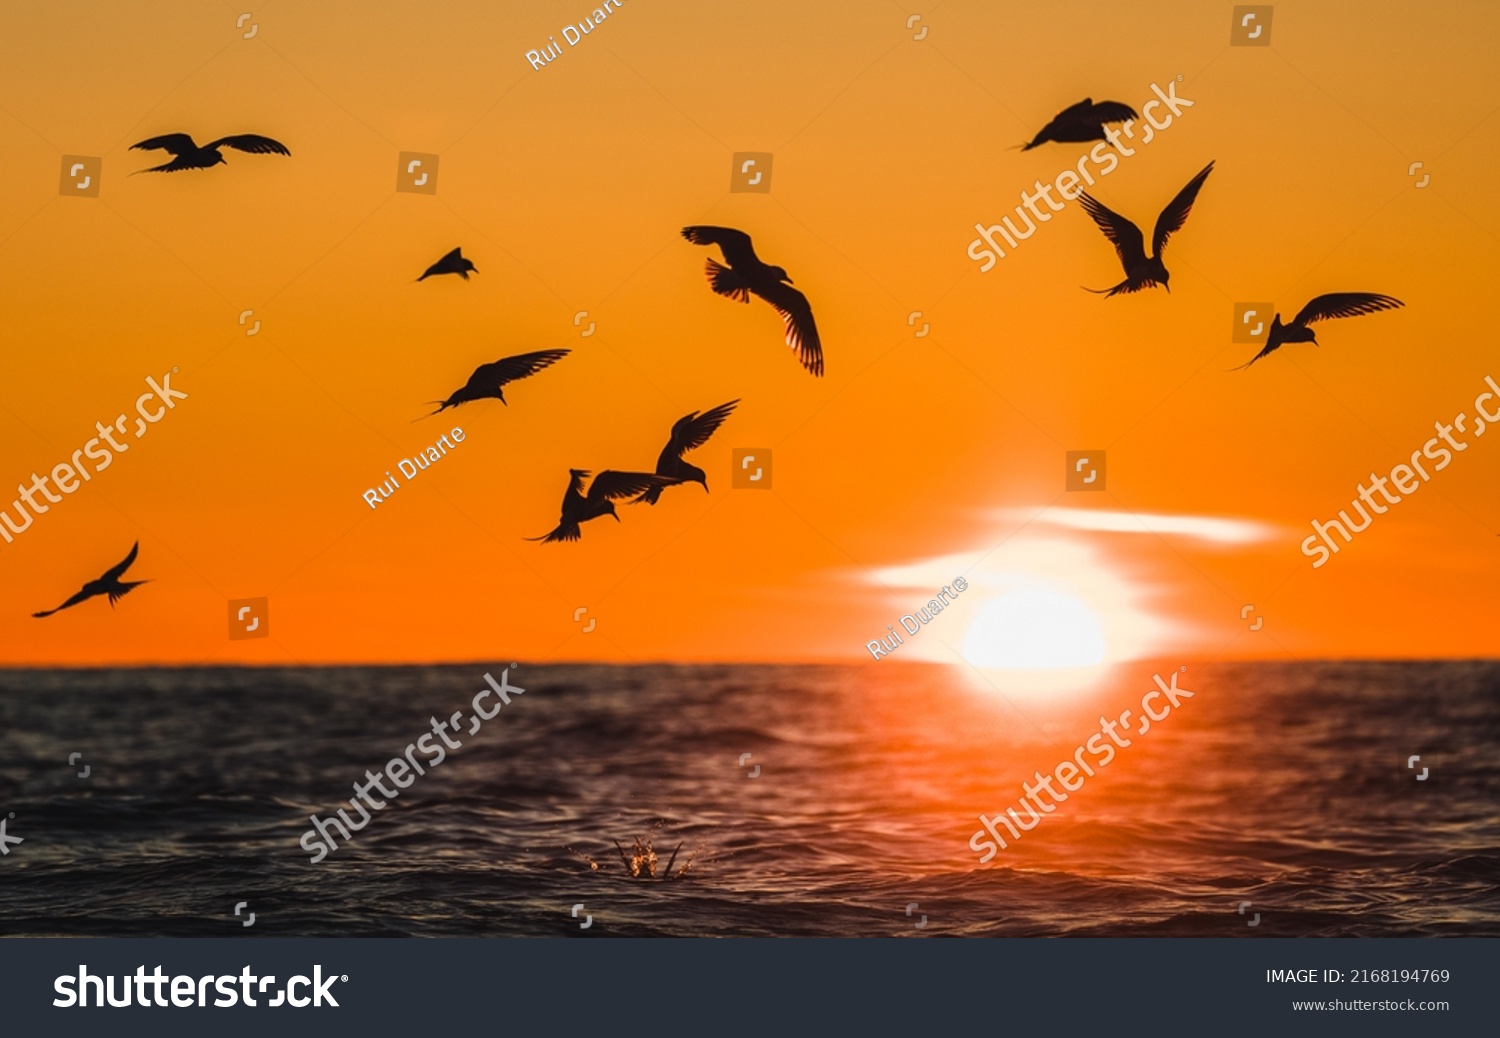 Arctic Terns during flight at midnight sun in Iceland #2168194769